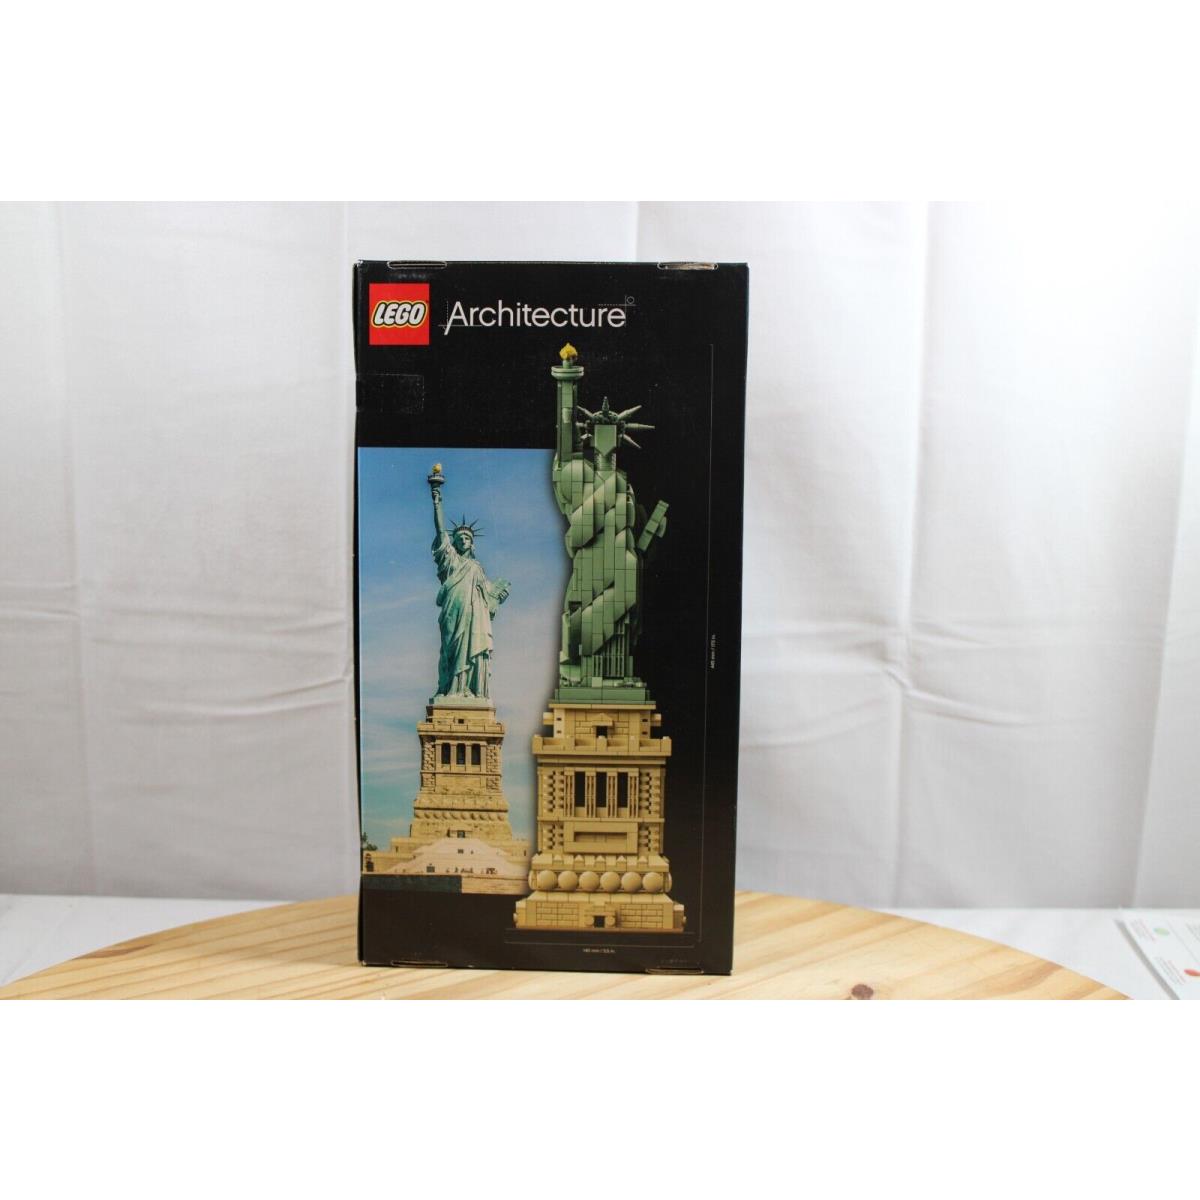 21042 Lego Architecture Statue of Liberty Nisb Usa Only